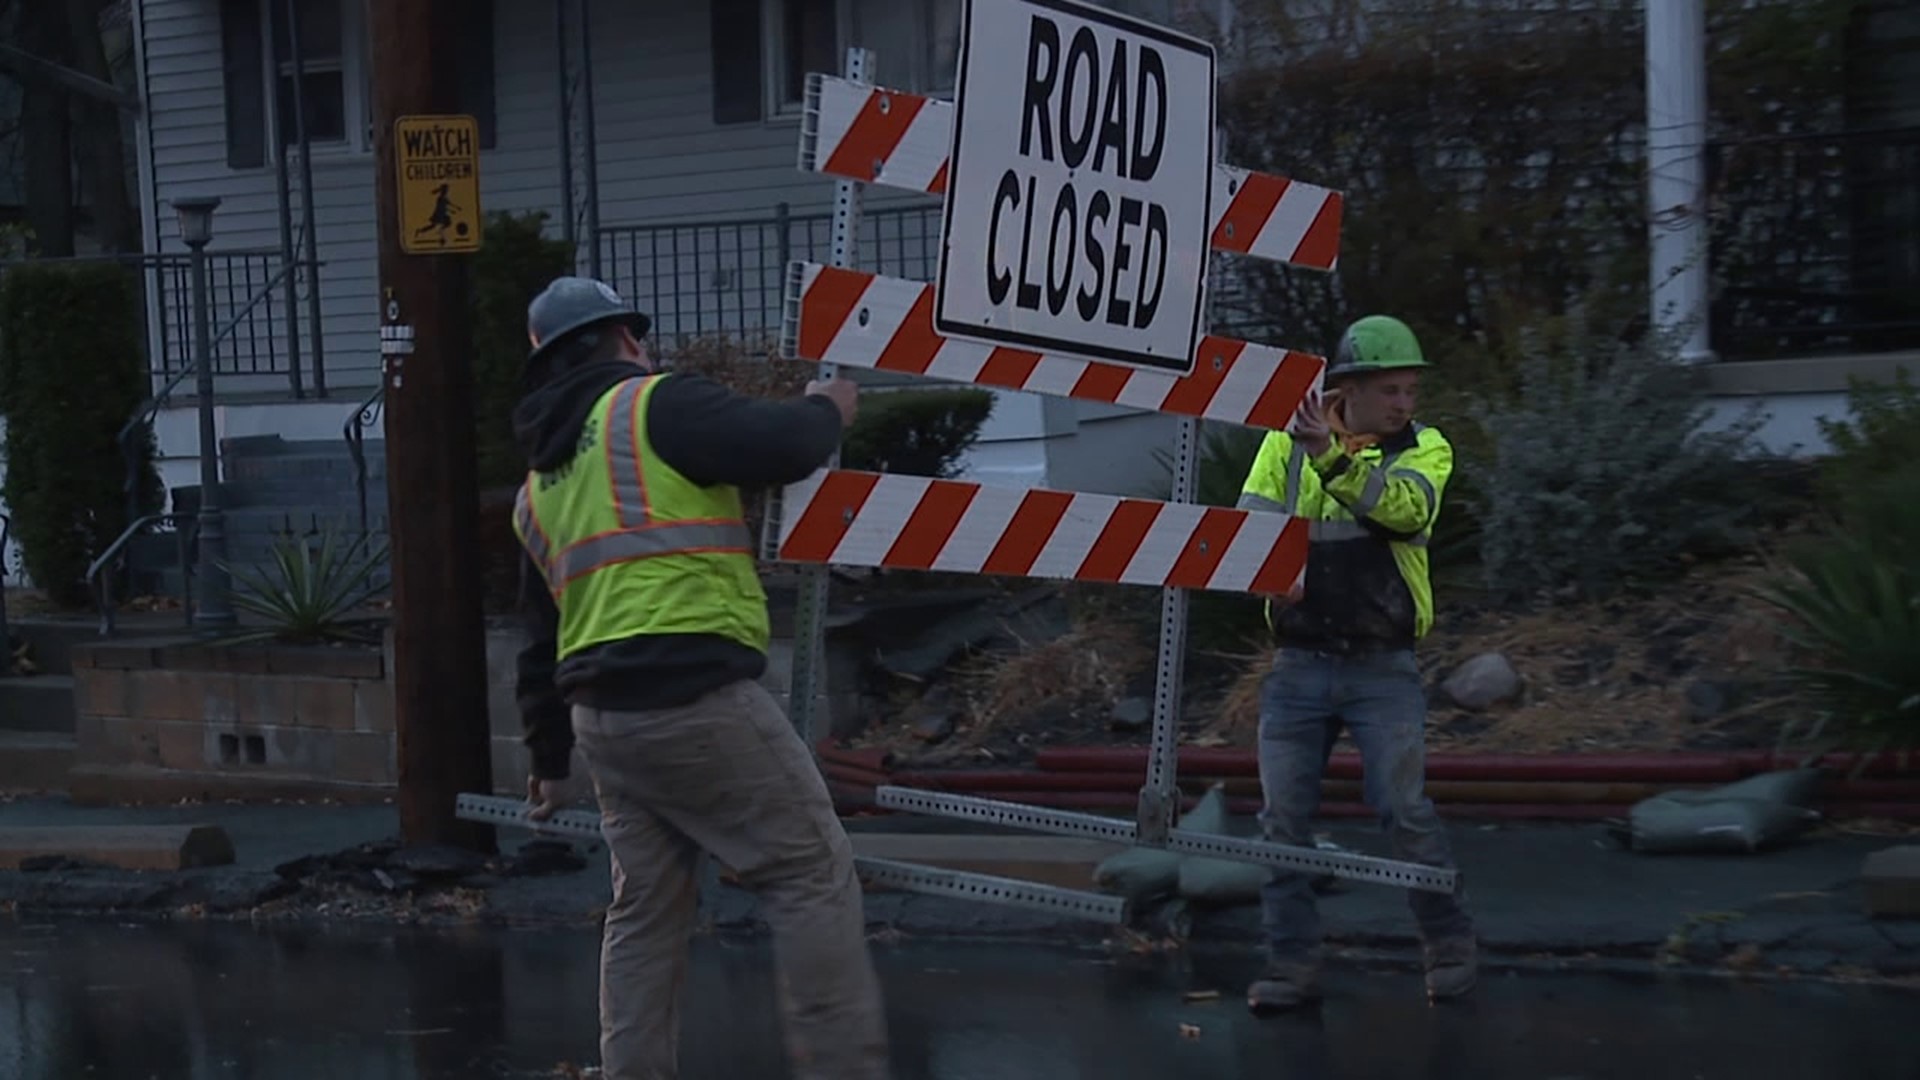 A busy street in Scranton is officially open again after flash flooding ravaged a number of city neighborhoods back in September.